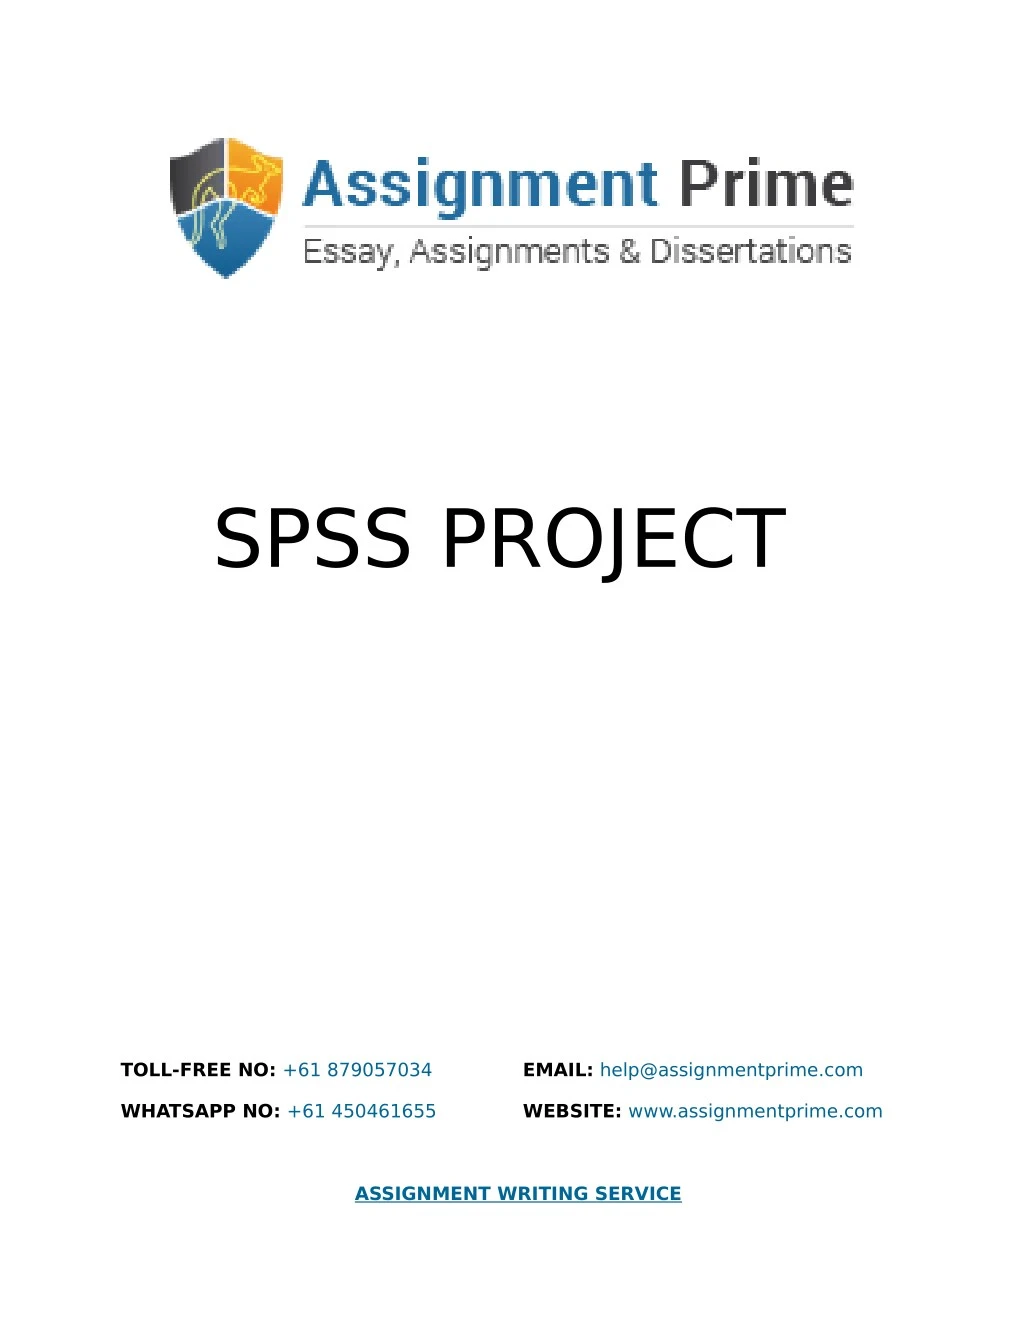 spss project